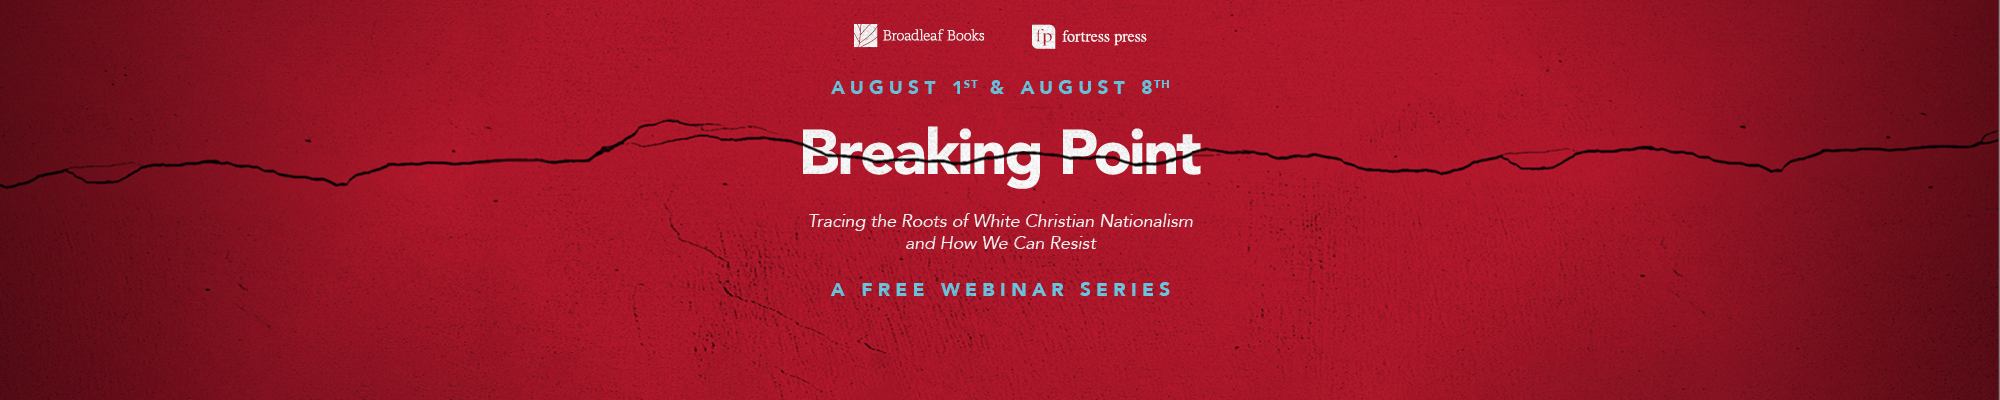 Broadleaf Books. Fortress Press. August 1st and August 8th. Breaking Point: Tracing the Roots of White Christian Nationalism and How We Can Resist. A Webinar Series.